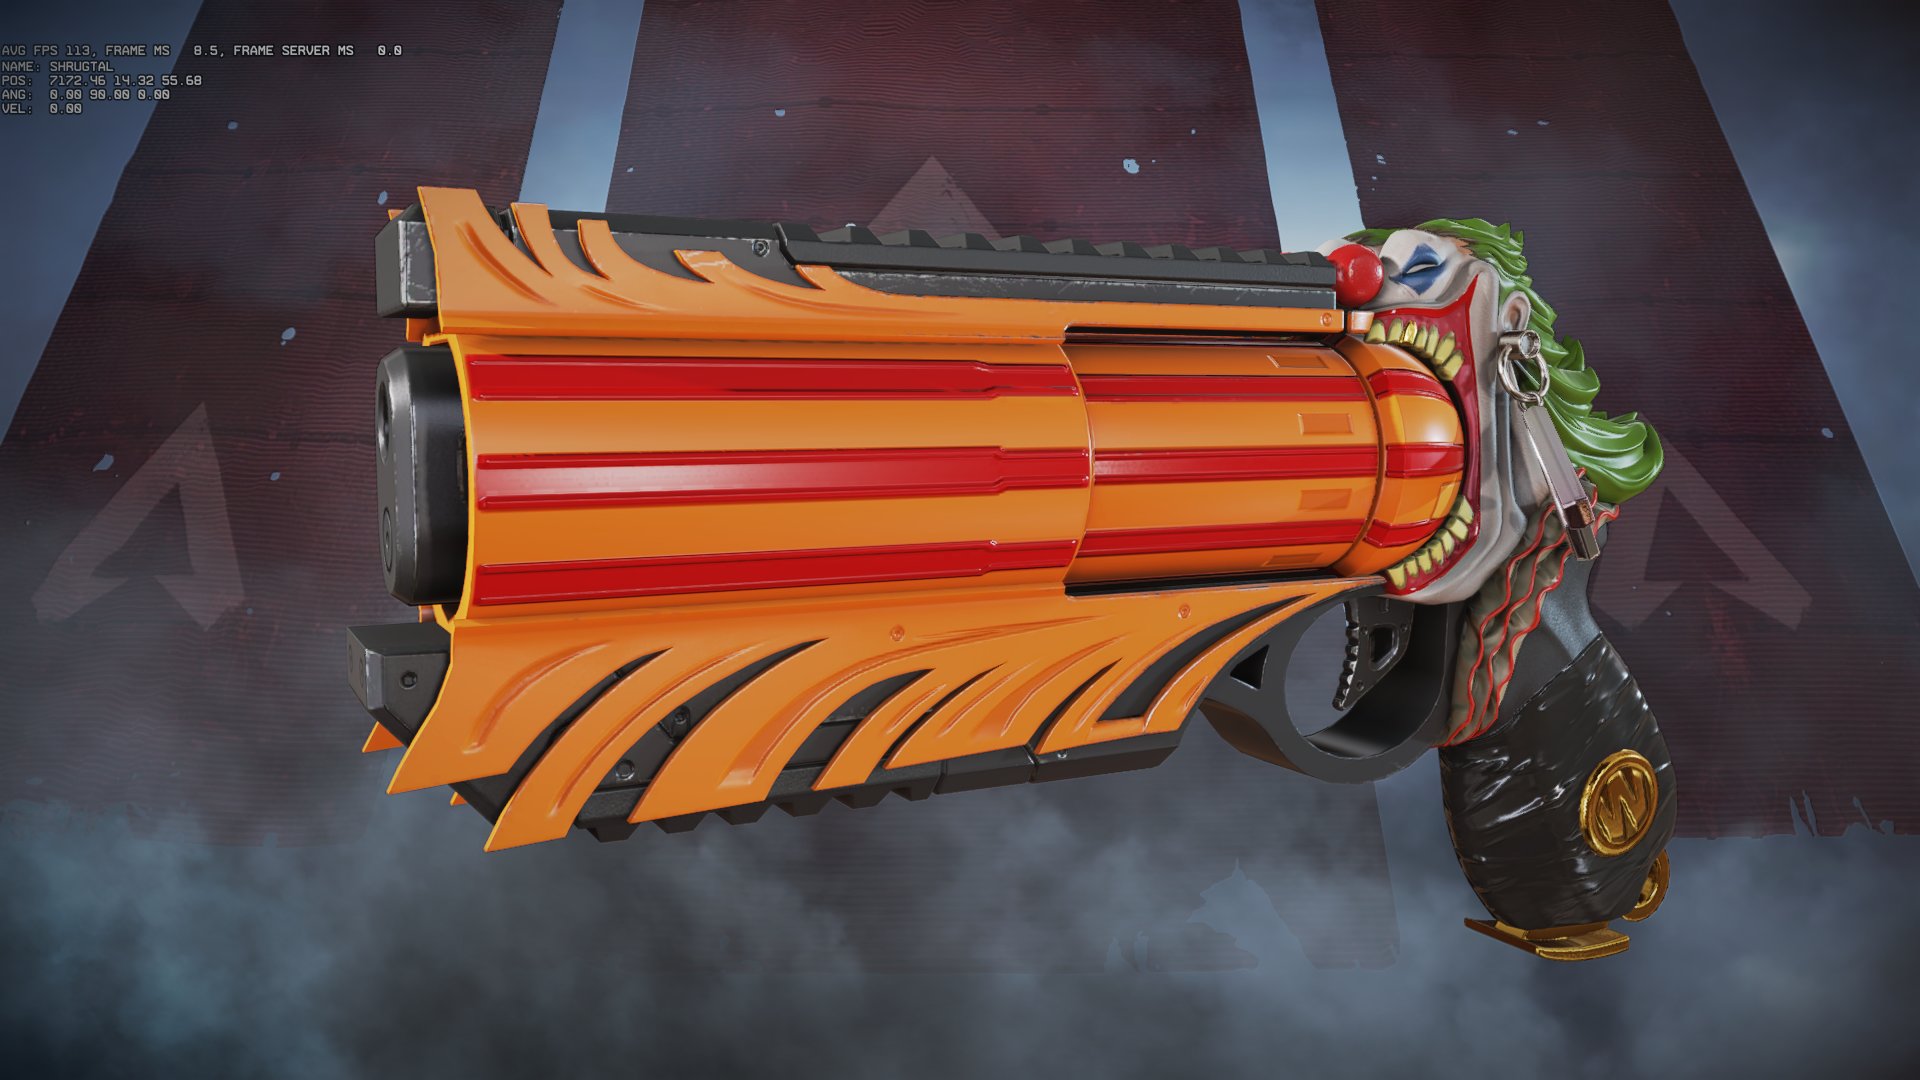 Shrugtal on Twitter: "Caustic's "The Last Laugh" original skin will be  available in a bundle with his new "Sweet Dreams" variant, the "Loud Mouth"  Wingman and the "Boom Stick" Mastiff.… https://t.co/8lTjMiljxi"